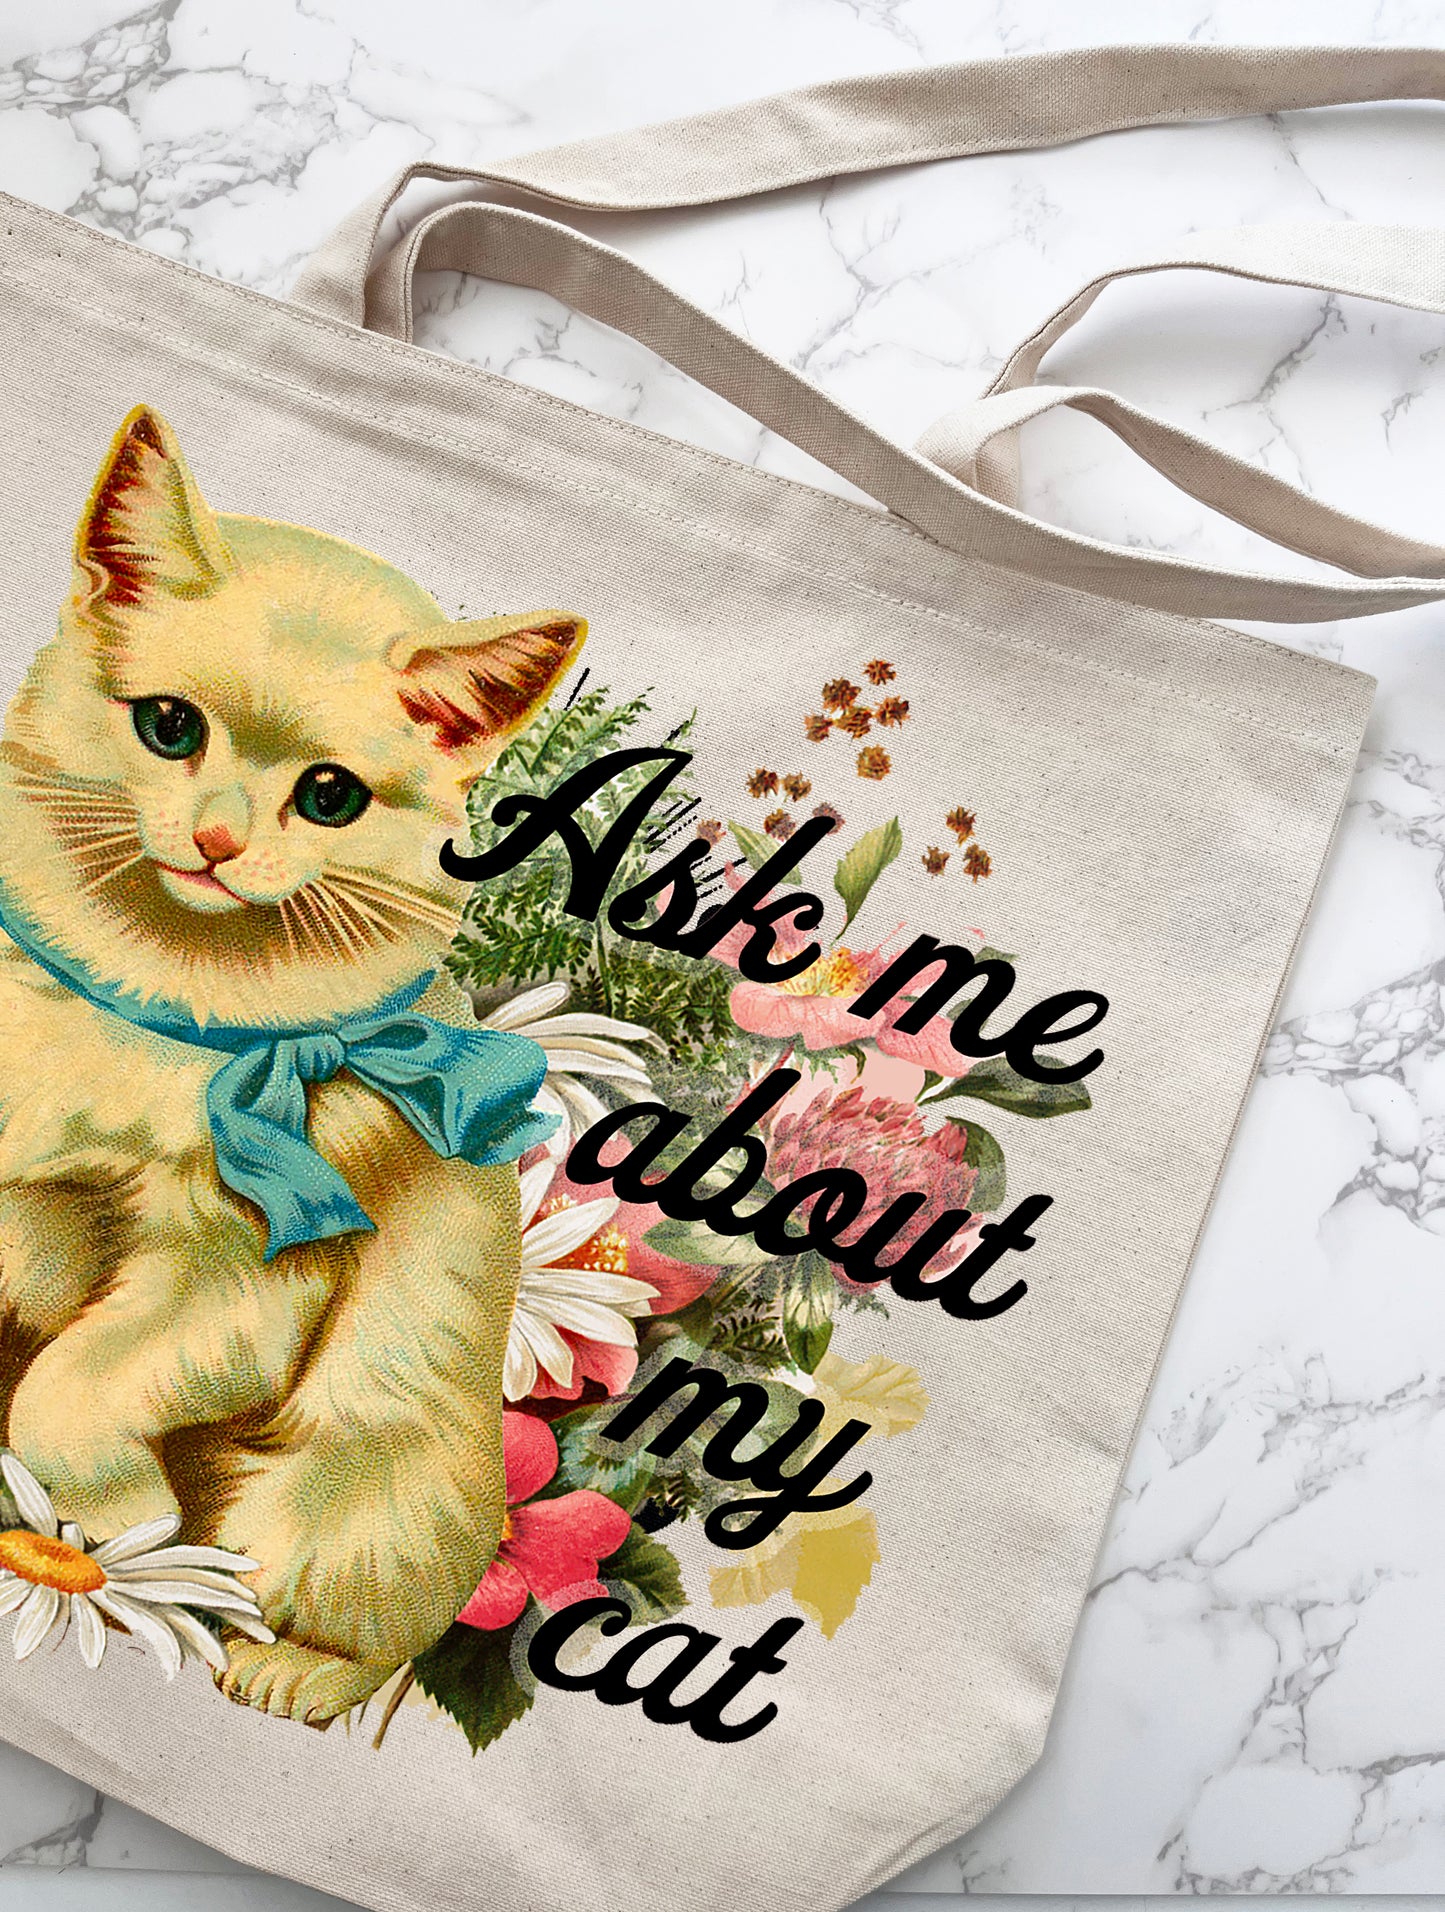 ask me about my cat funny tote bag cute retro style canvas tote bag reusable shopping bag farmers market tote travel bag with cat kitty cute funny tote coin laundry